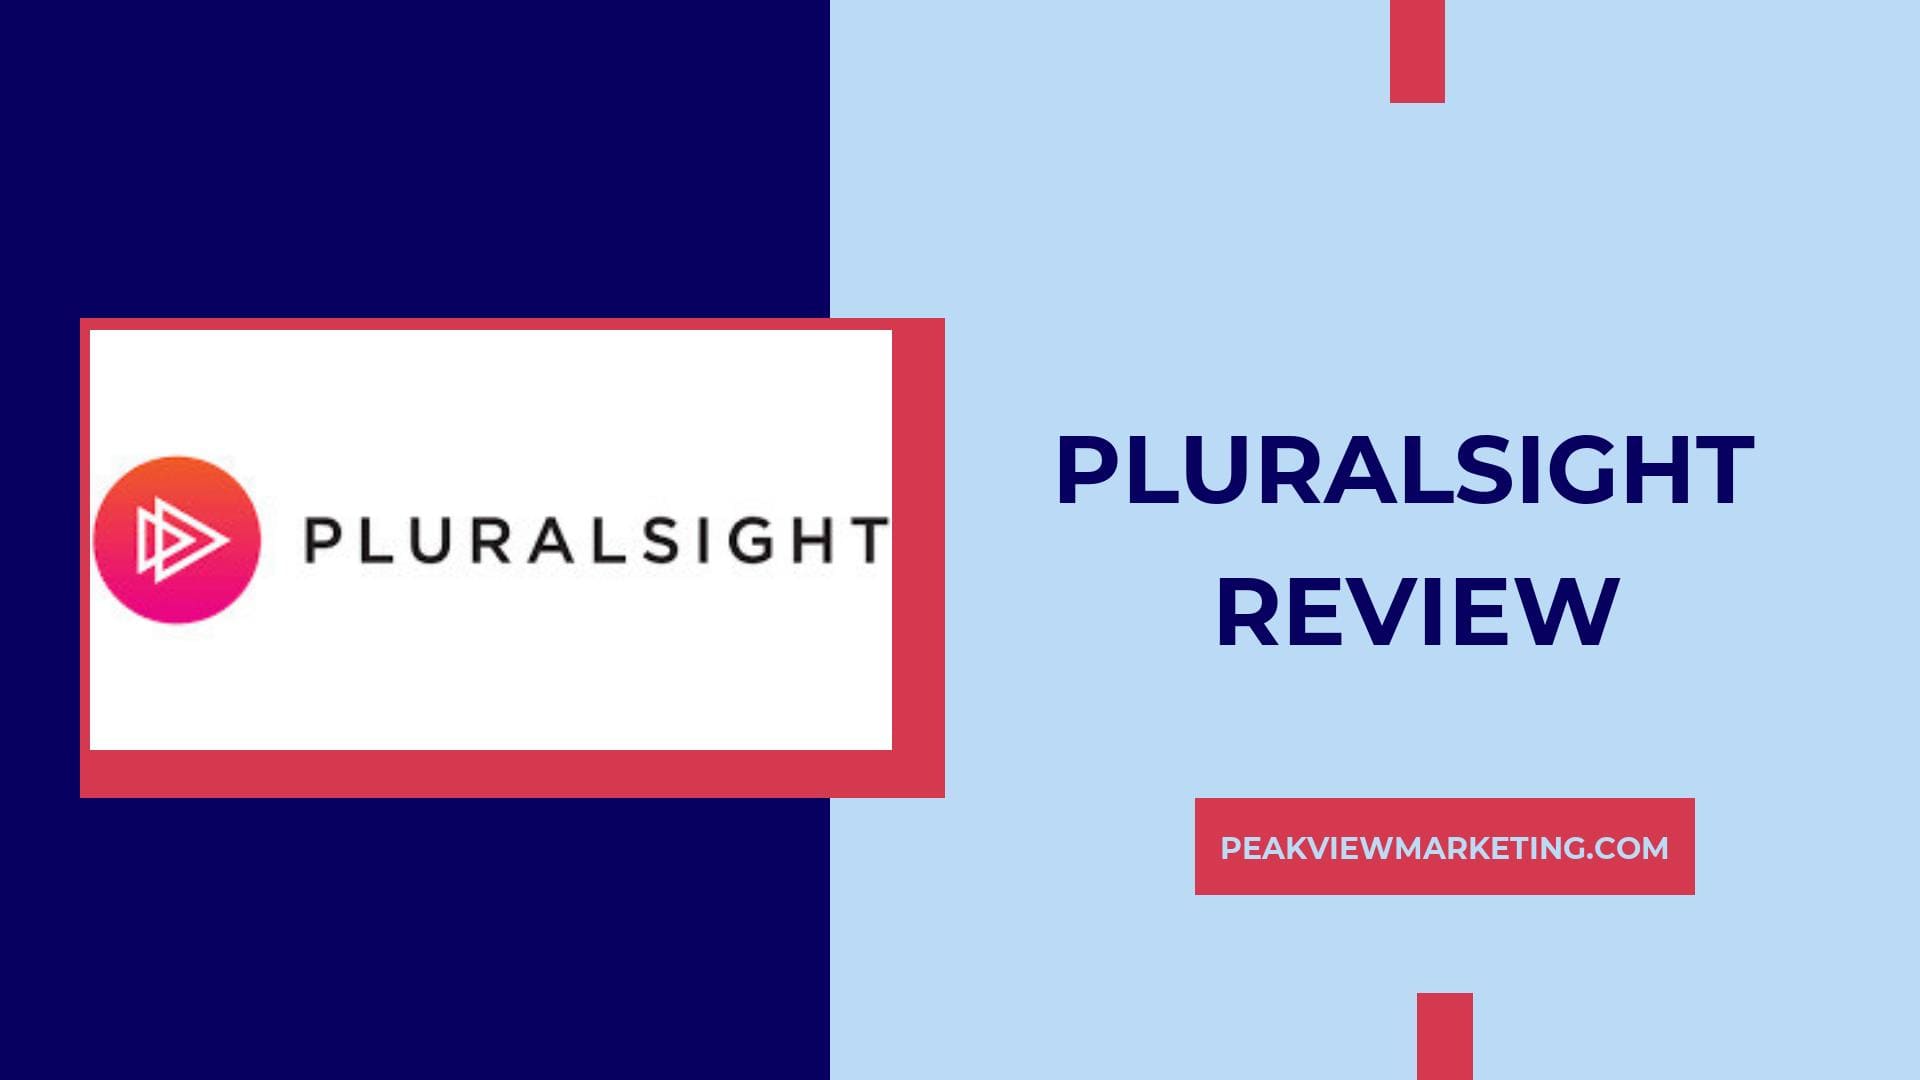 Pluralsight Review Image